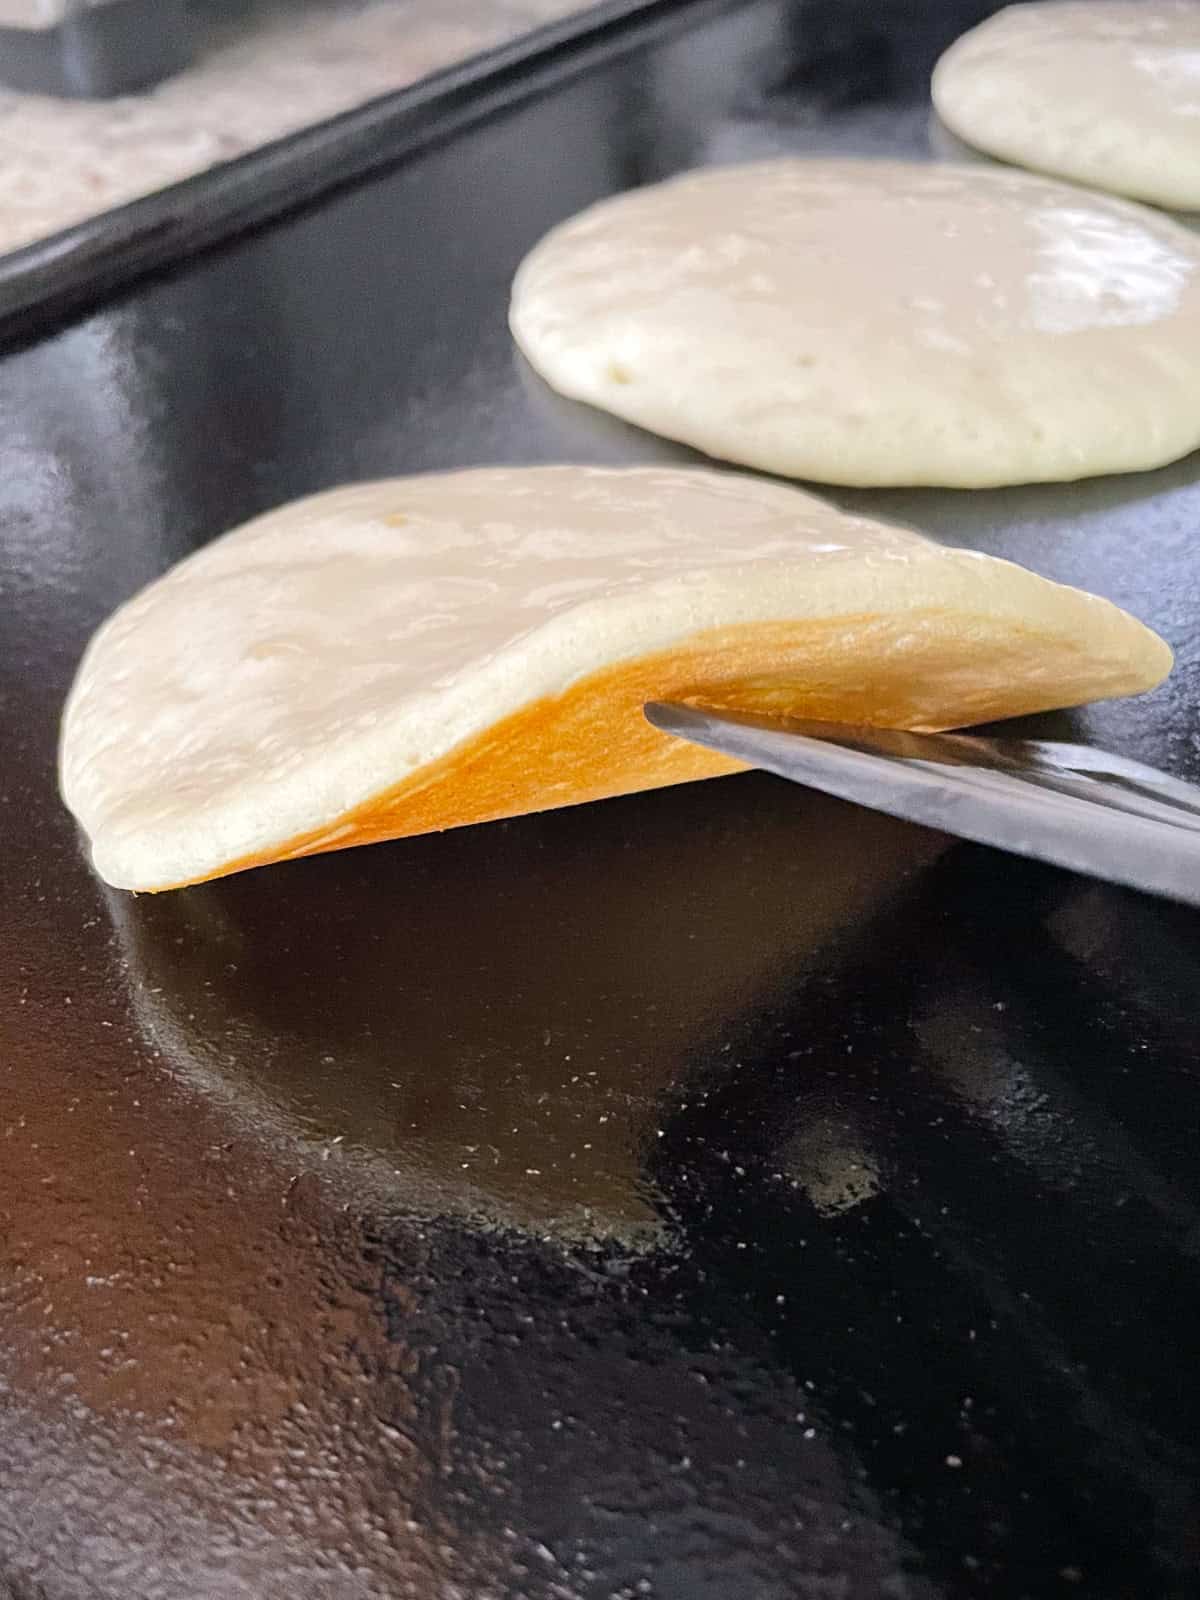 Lifting a gluten-free pancake on the griddle to check for doneness.